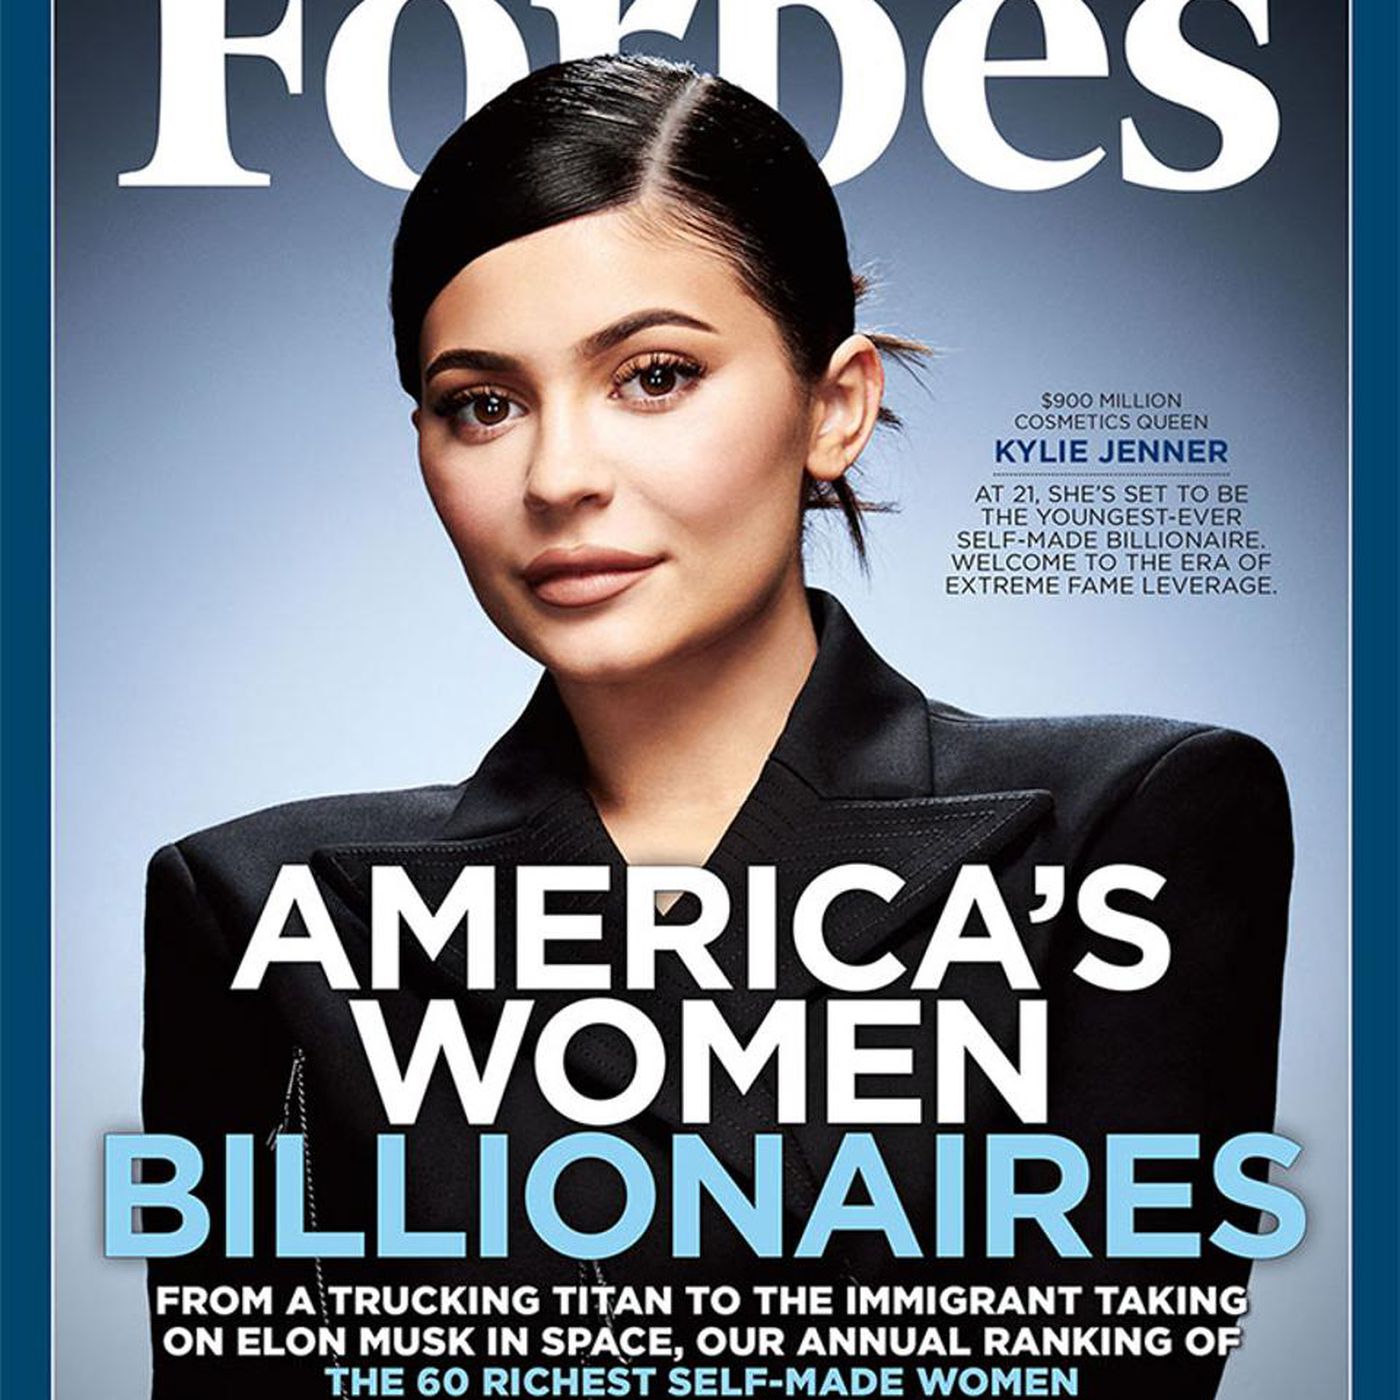 Who is the youngest female billionaire Kardashian?